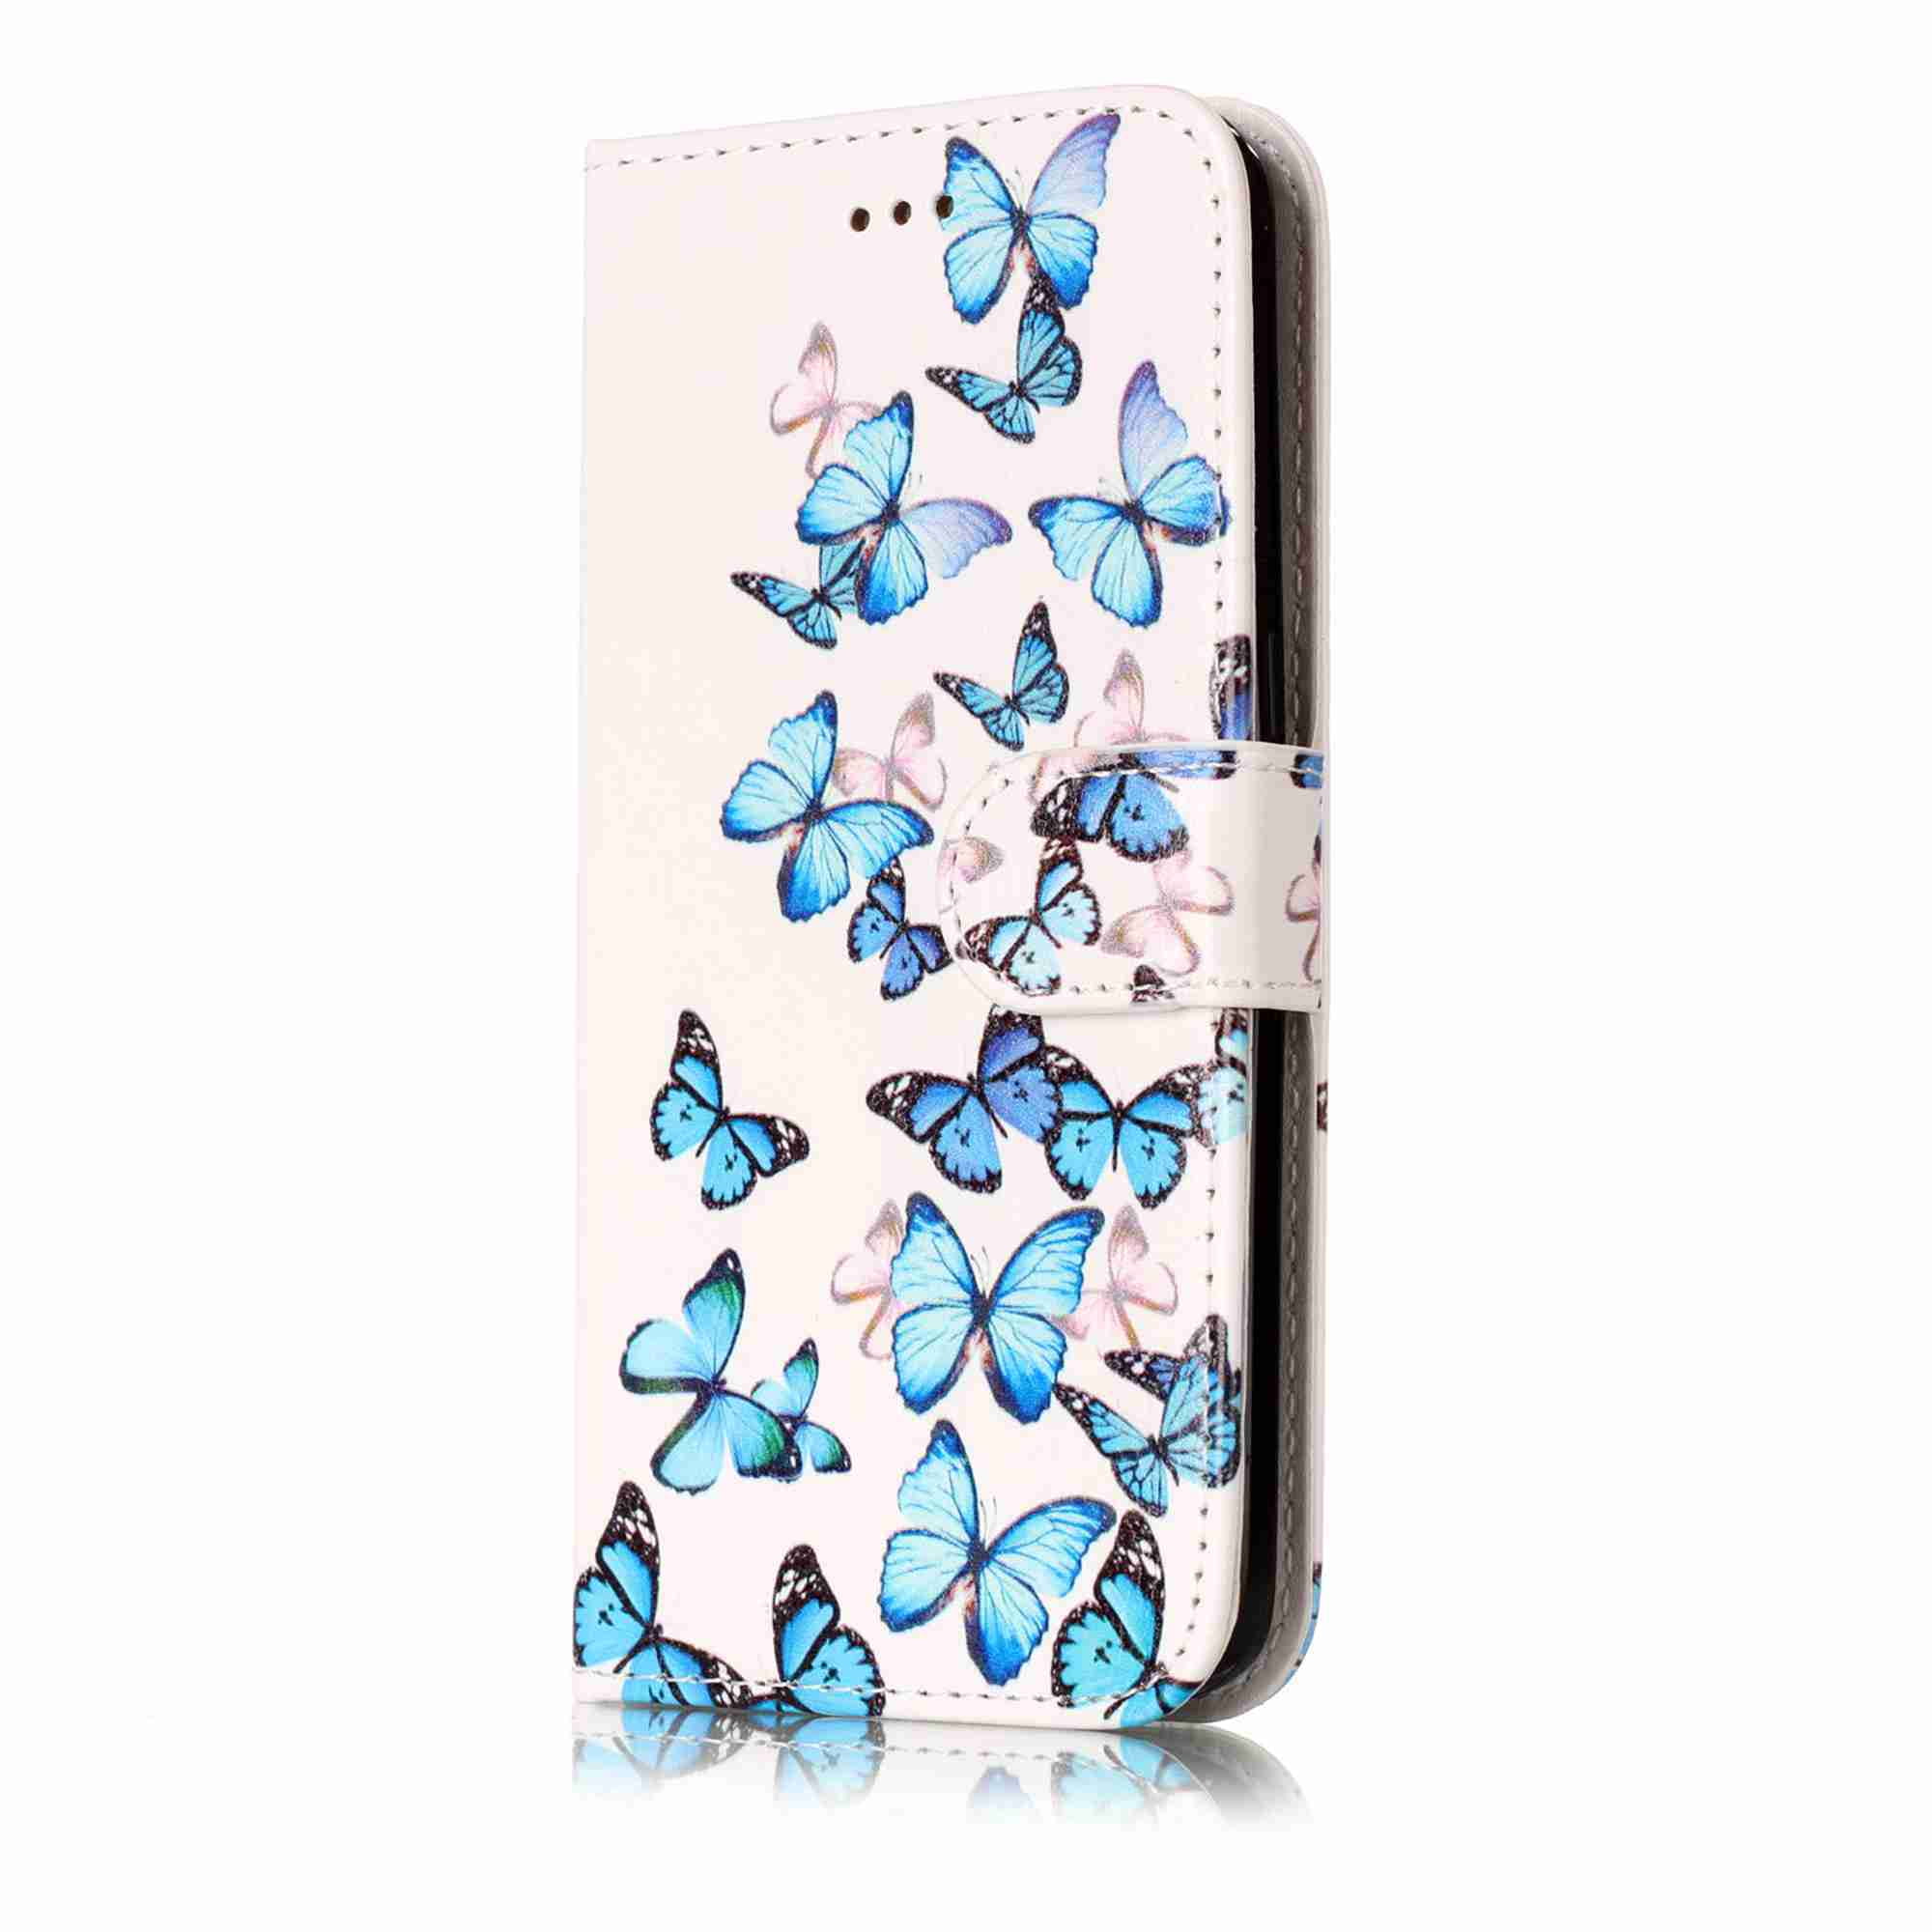 Dteck Case For Samsung Galaxy S7 [Kickstand Feature] Luxury PU Leather Wallet Case Flip Cover with [Card Slots] and [Note Pockets], Butterfly - Walmart.com